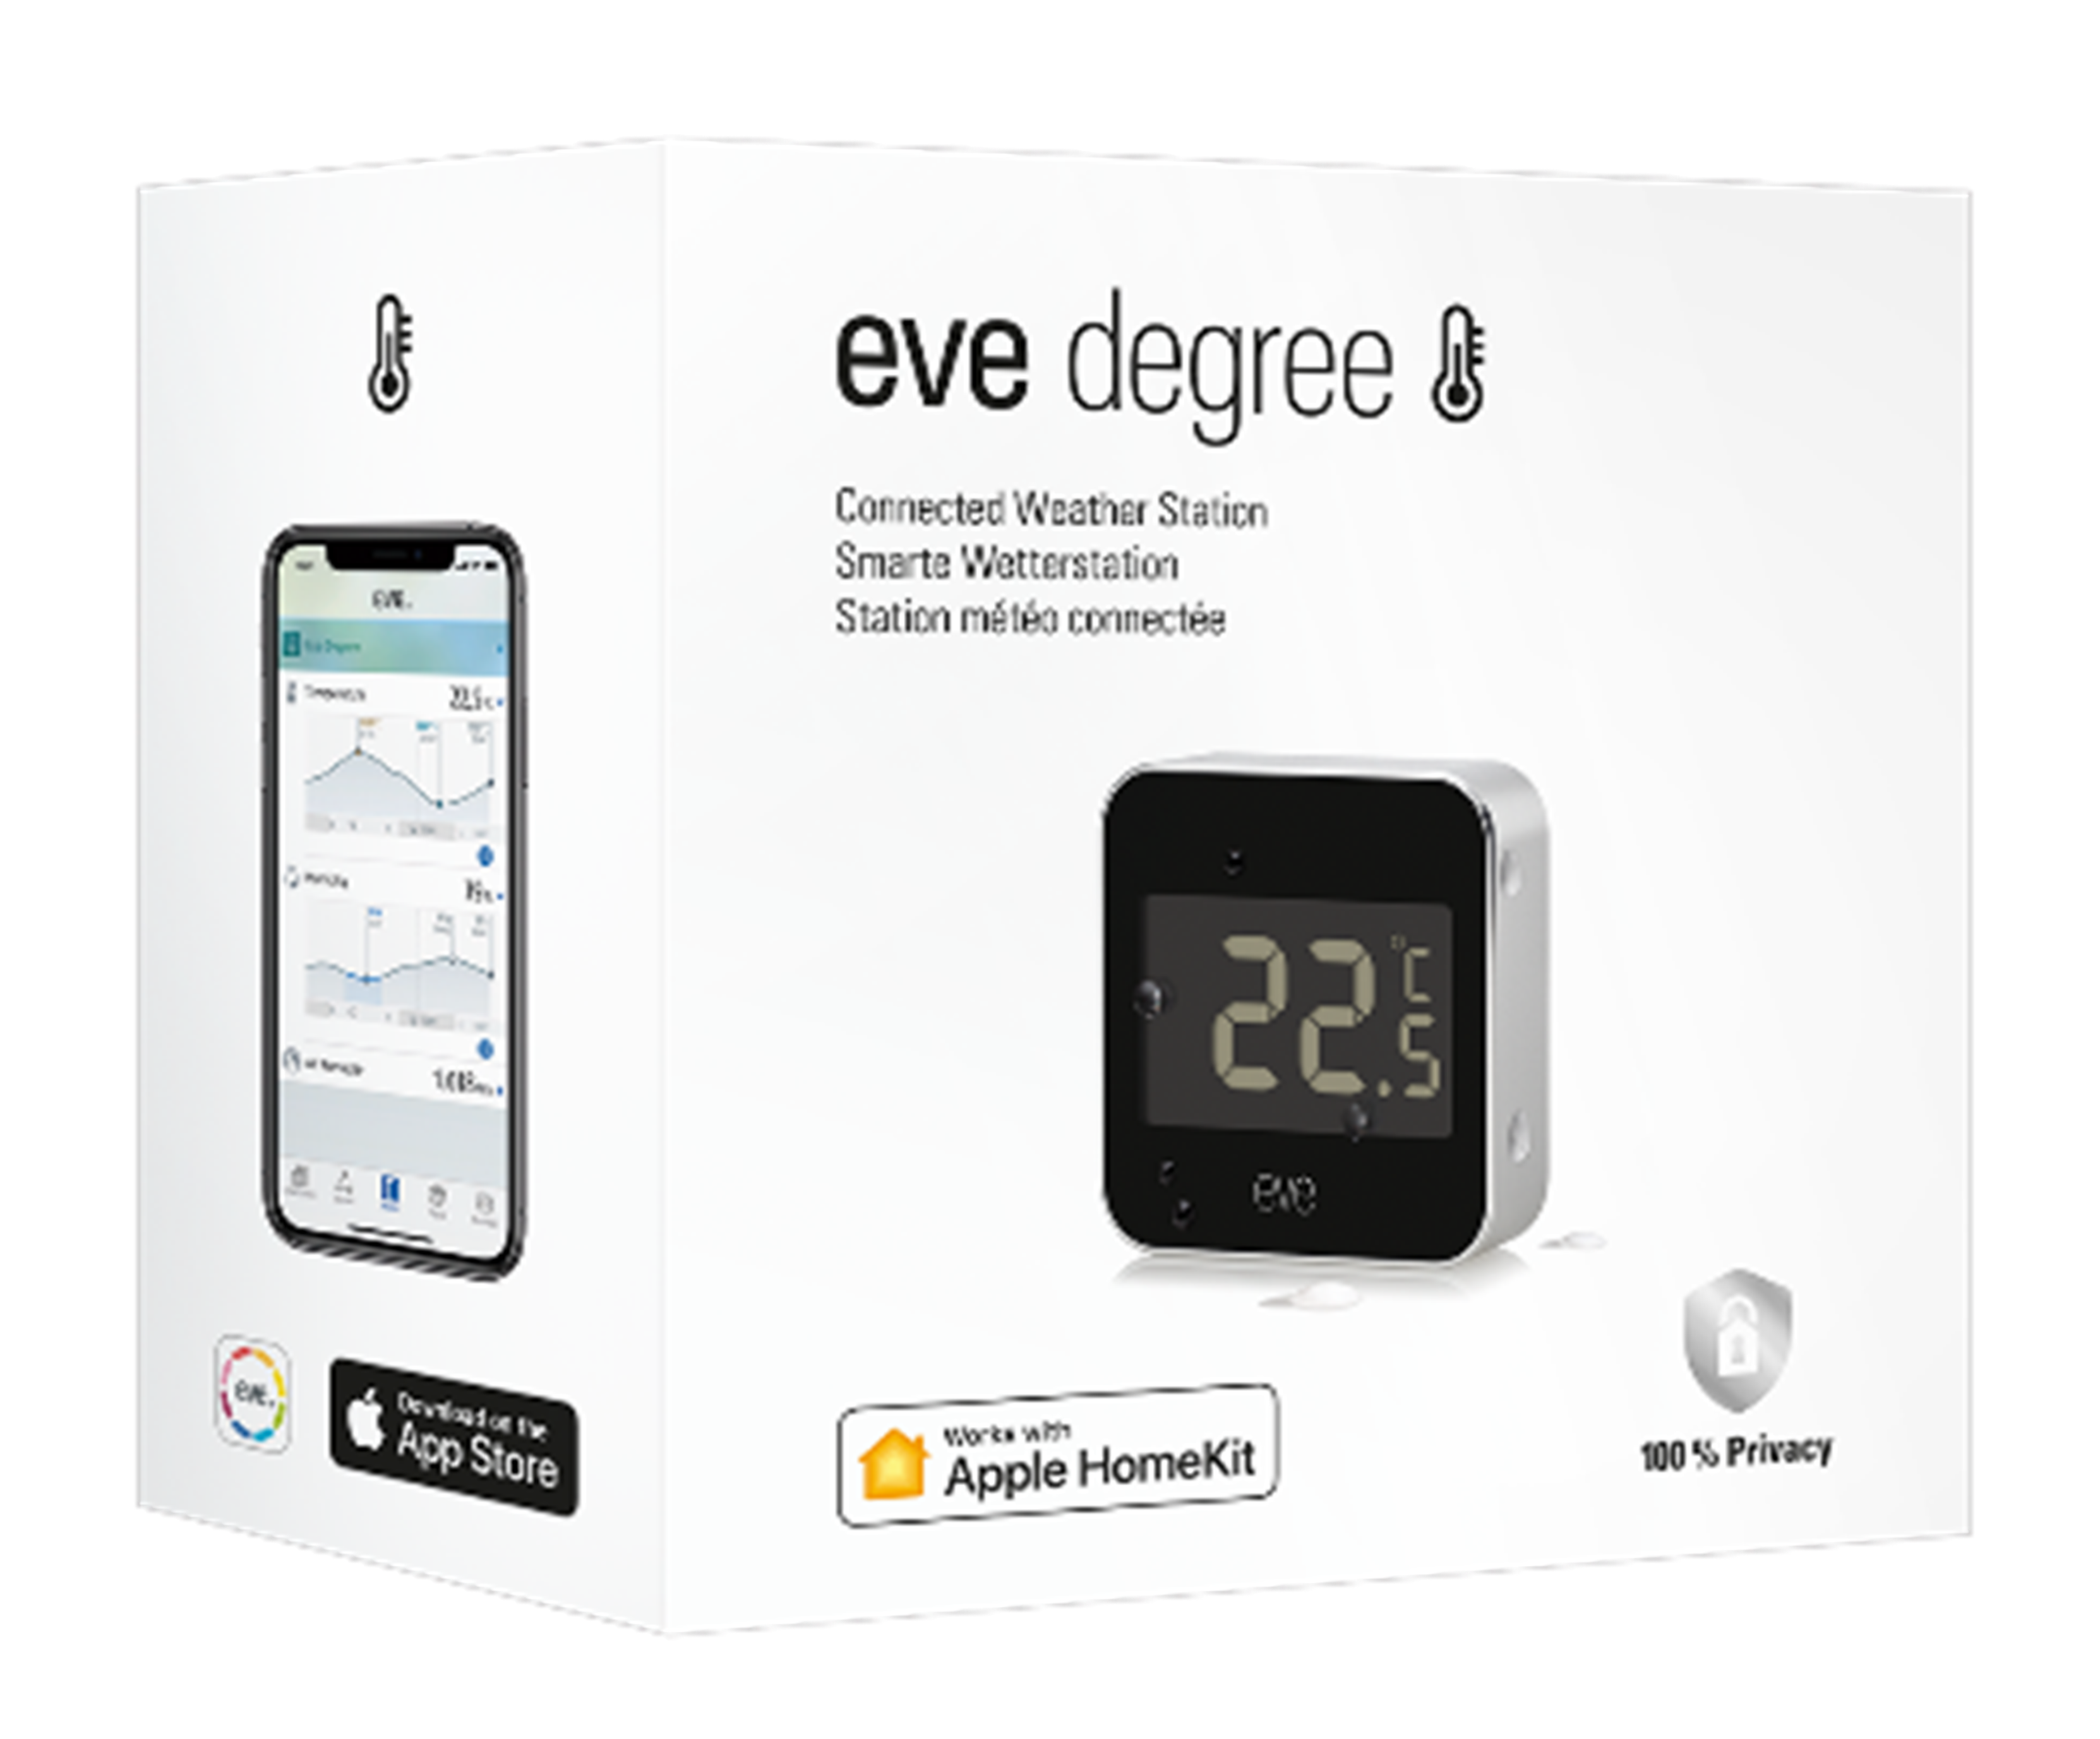 Eve Degree - Connected Weather Station - Answer Lah !!